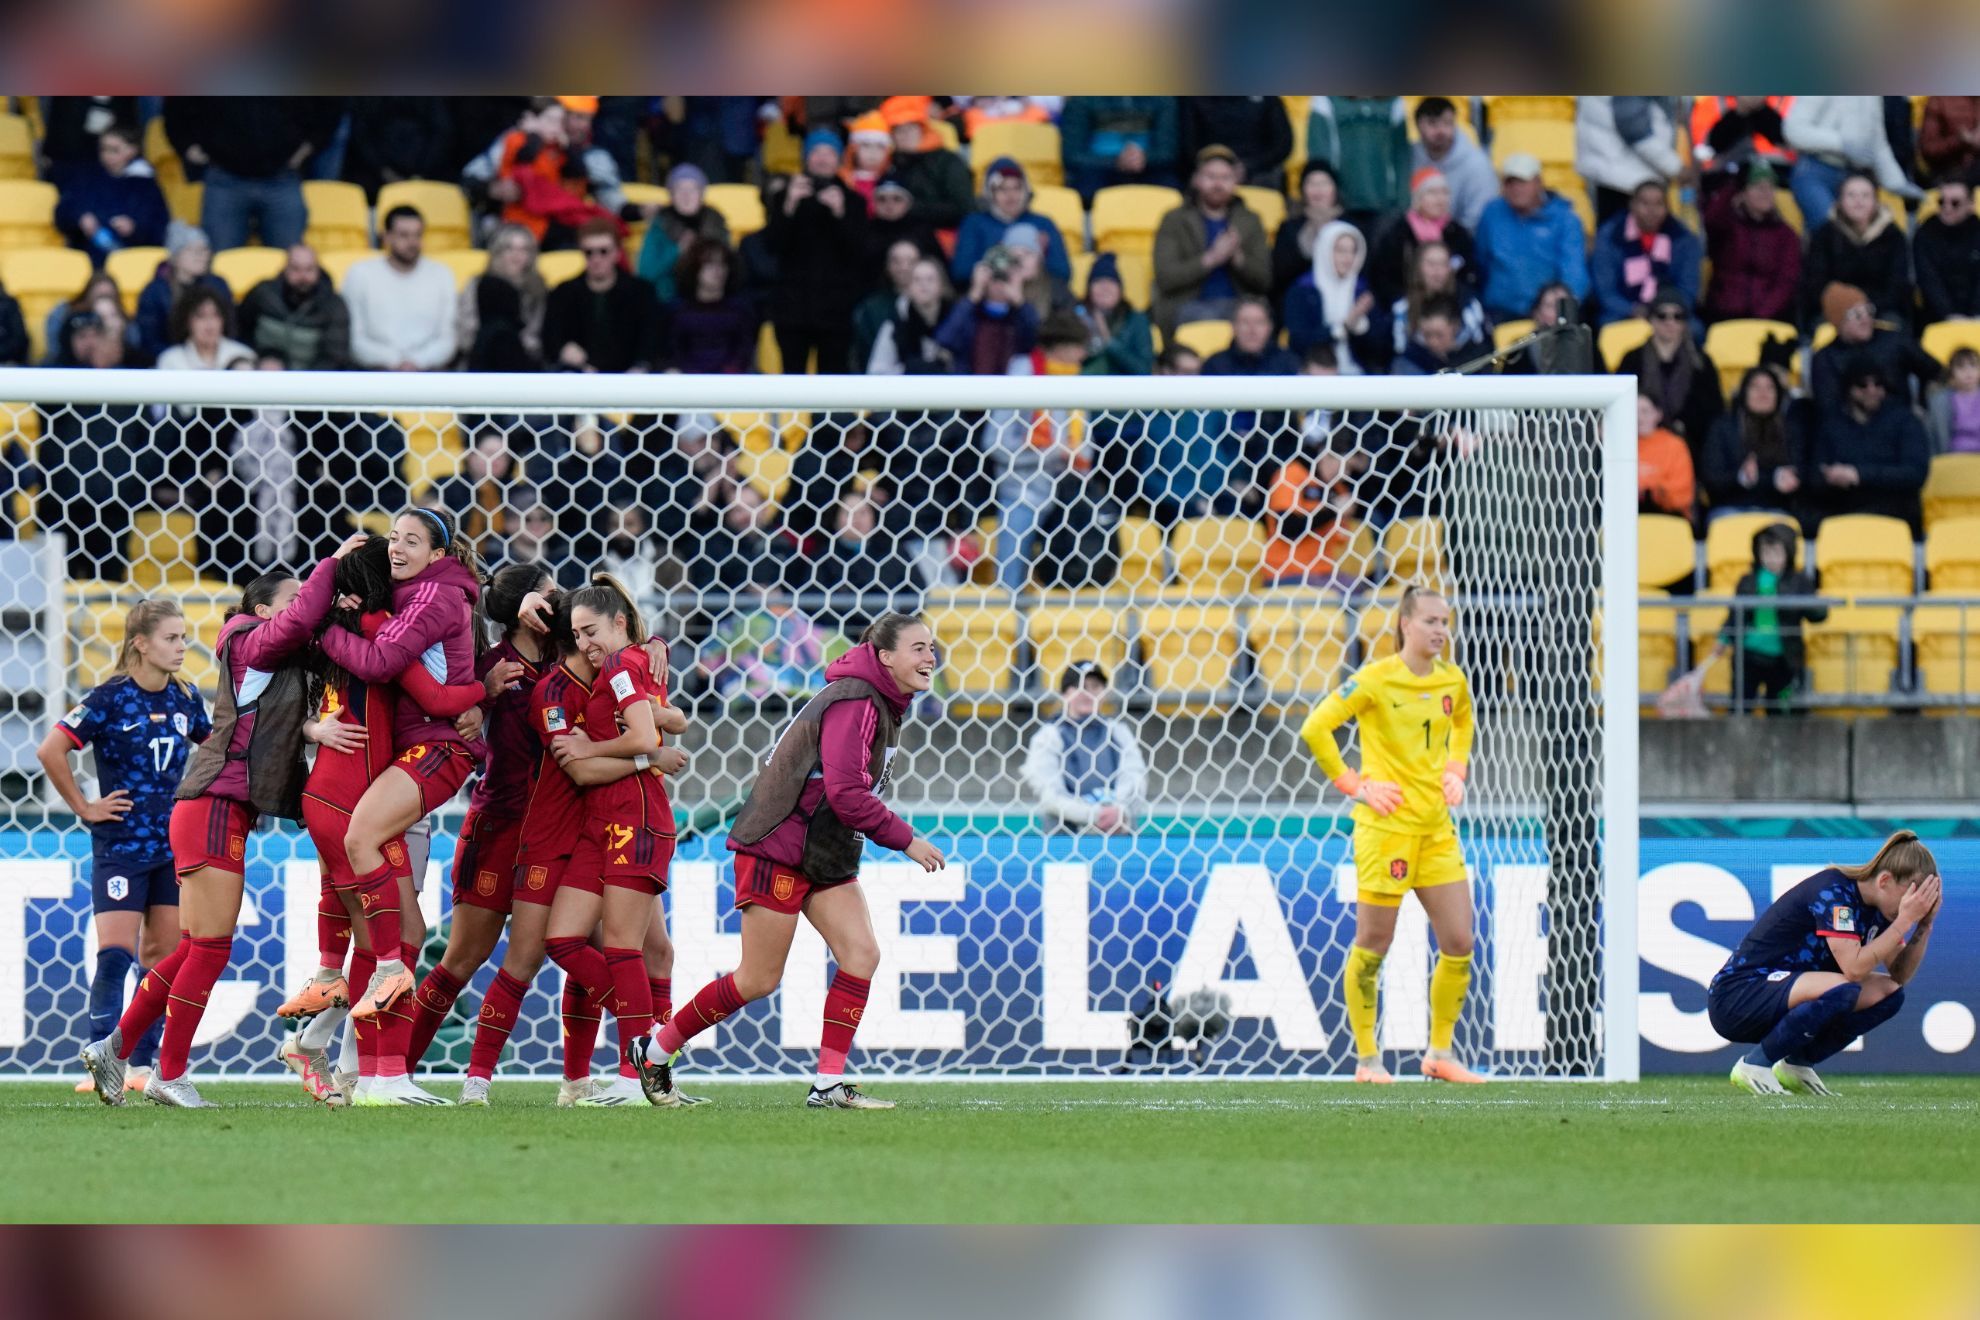 Salma Paralluelo clinches Spain's ticket to semis with extra time goal vs. Netherlands